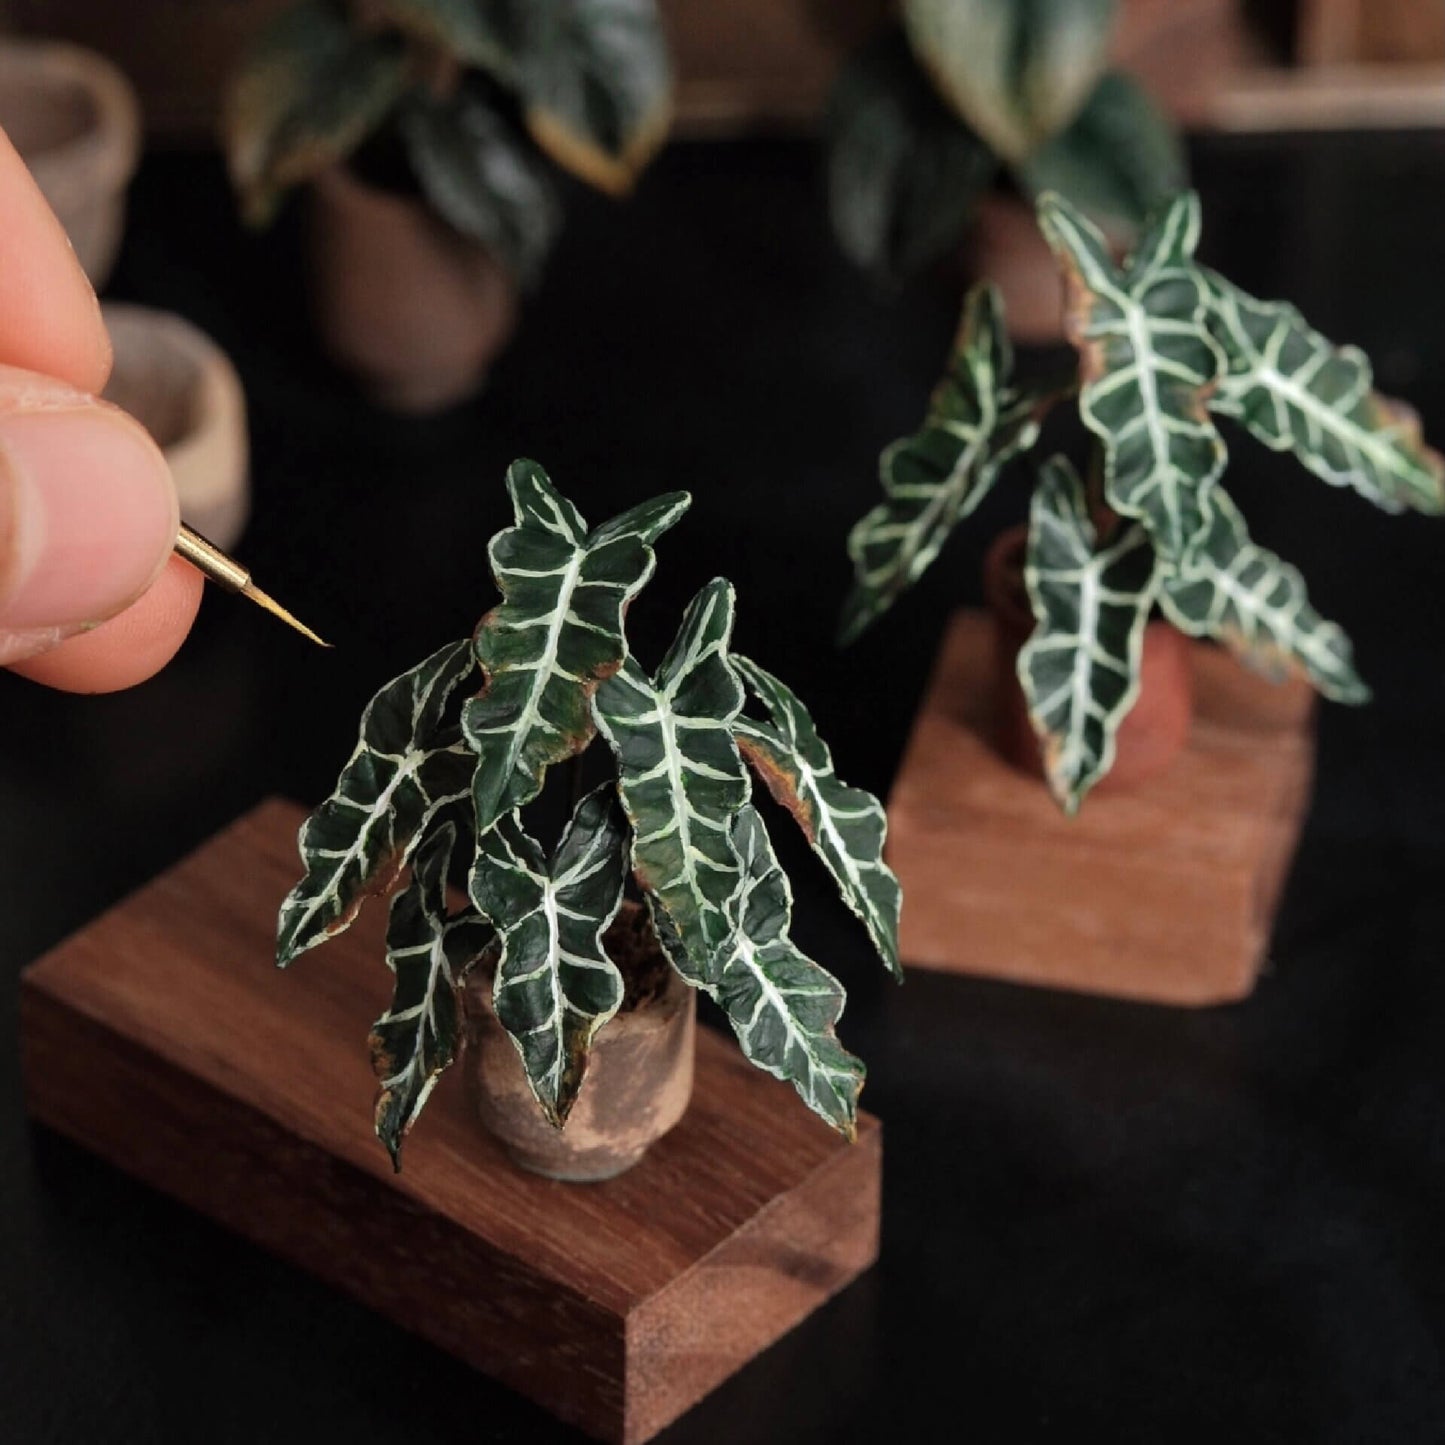 Alocasia Polly, also known as Alocasia Amazonica or African Mask plant, is a stunning tropical houseplant renowned for its unique foliage and striking appearance. Scale: 1:6; 1:12 Material: Handmade from Clay